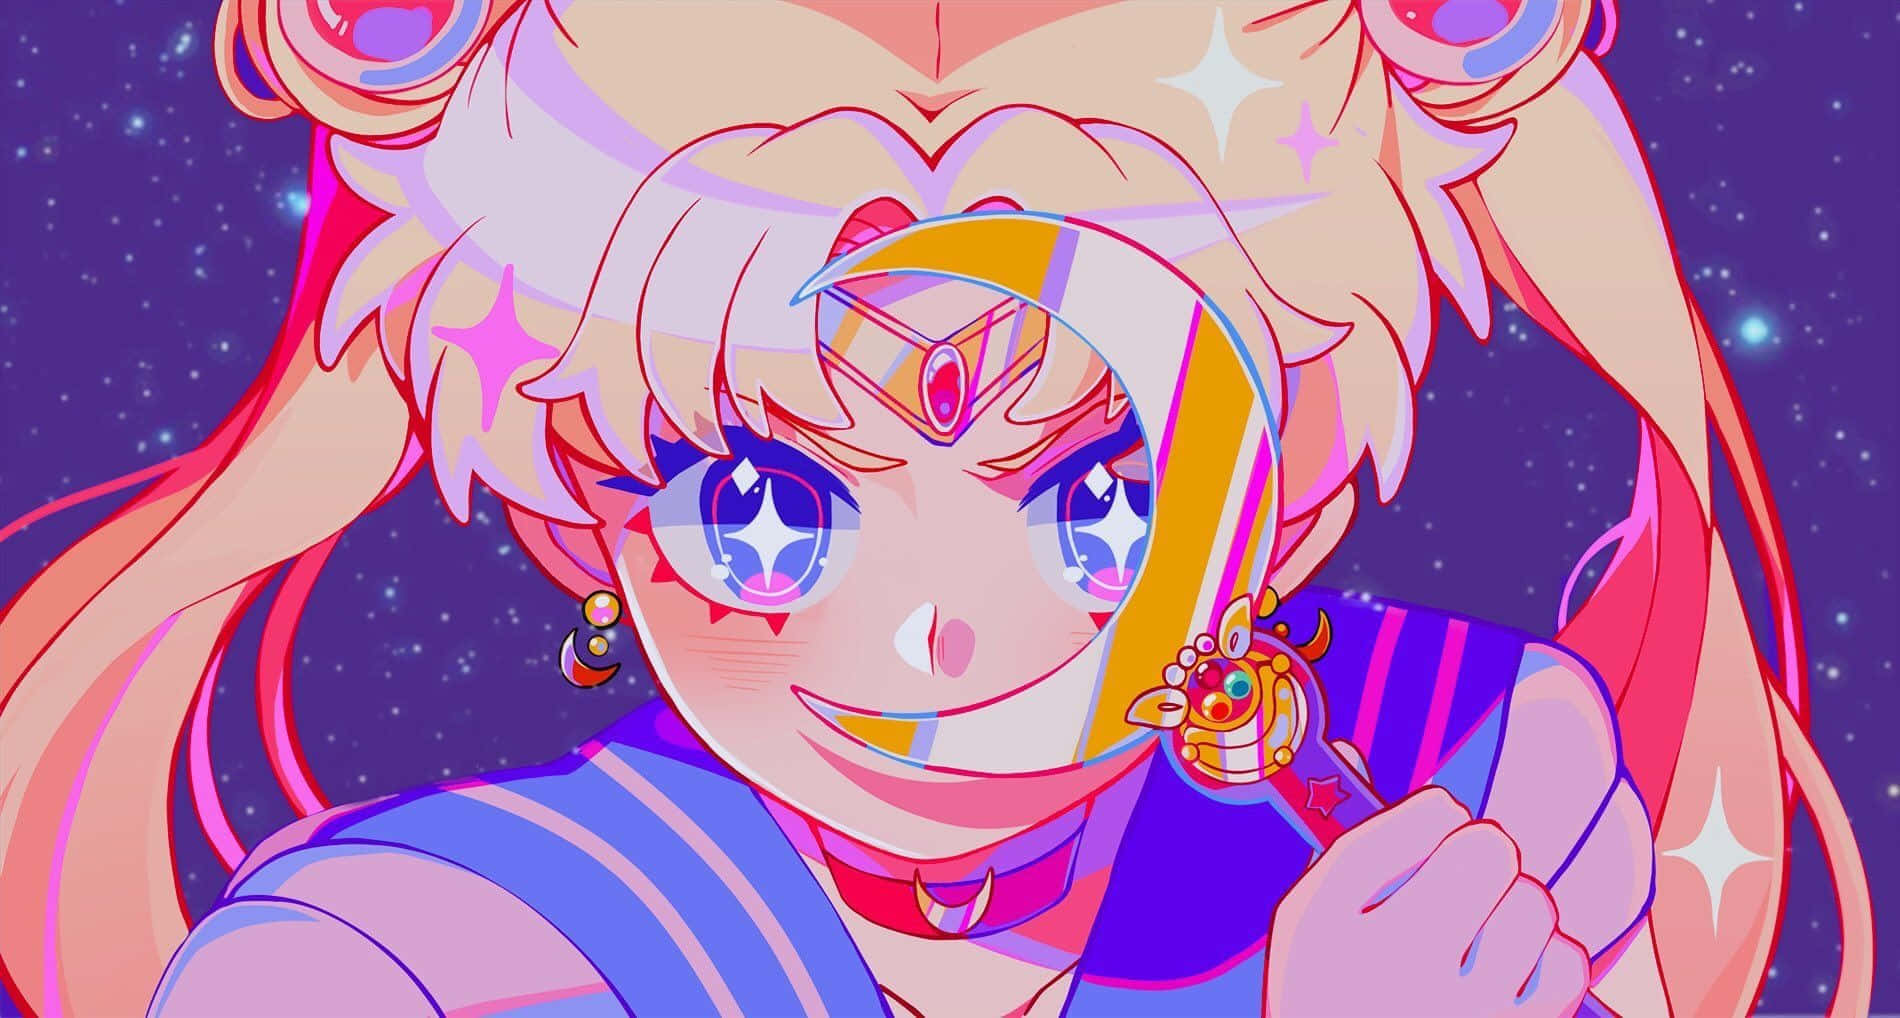 Sailor Moon protecting the universe with the power of the Moon